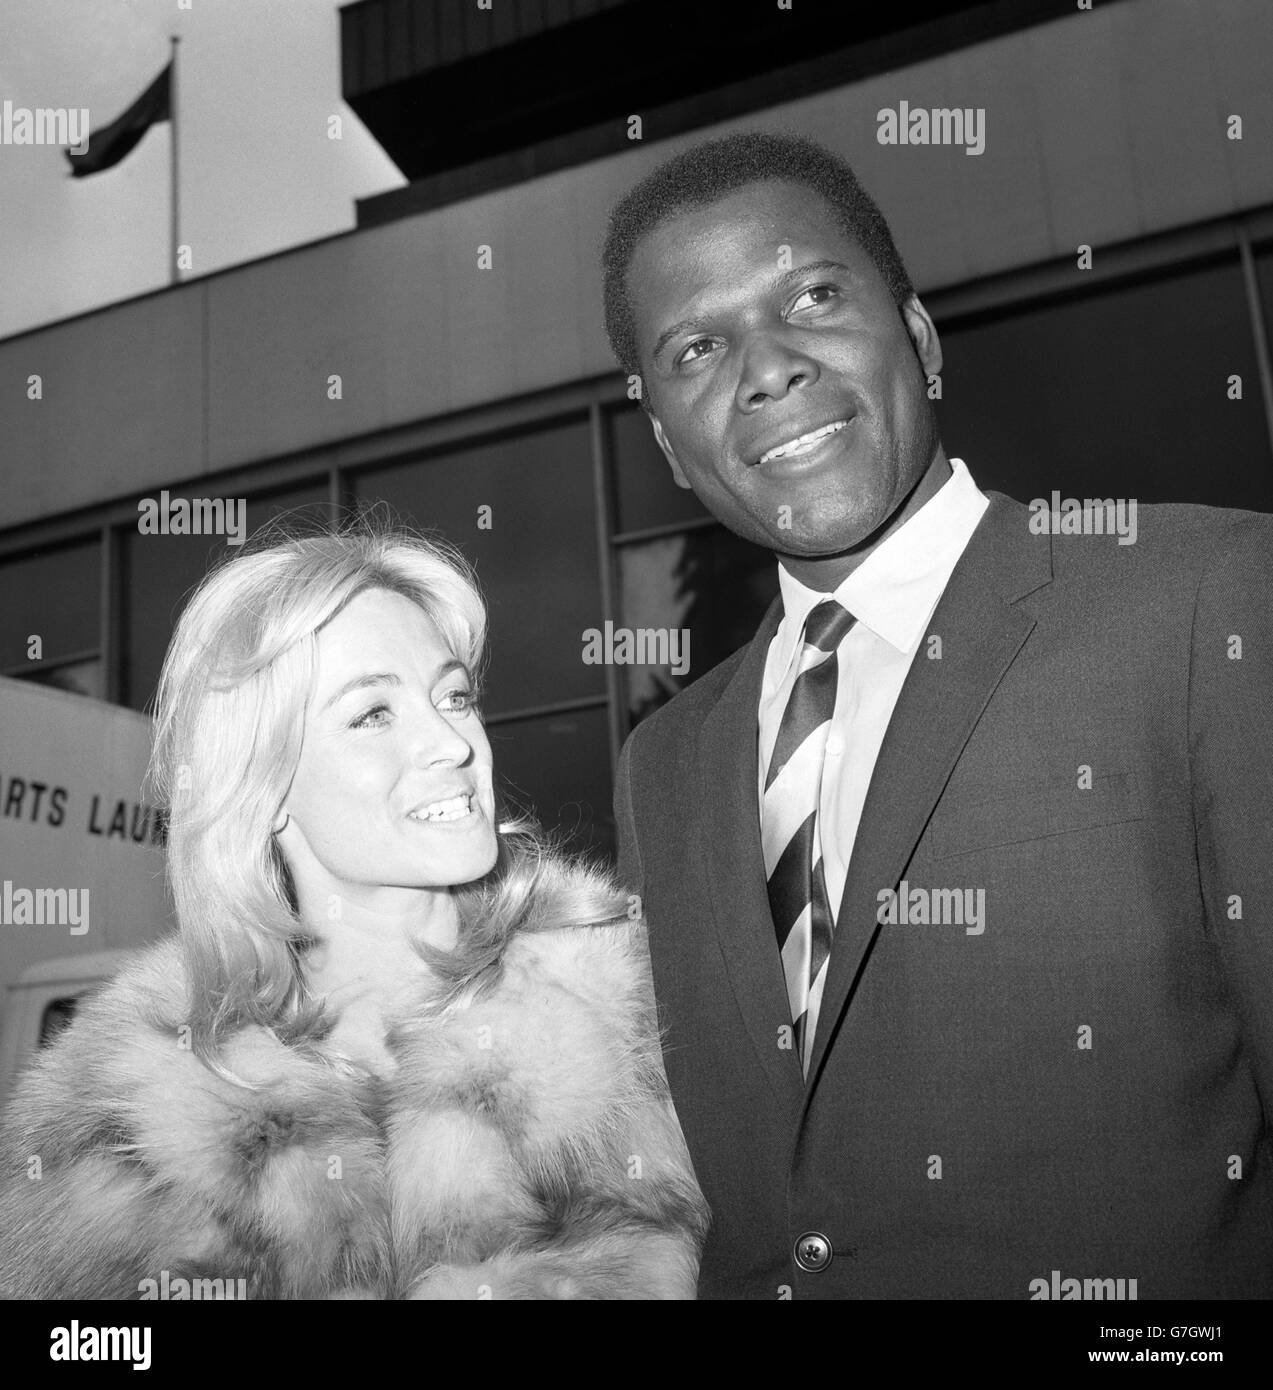 Oscar-winning actor Sidney Poitier is met at London Airport by Suzy Kendall, who will star with him in the film To Sir, With Love. Both play teachers in a tough London school in the movie, which will go into production at Pinewood Studios. Stock Photo